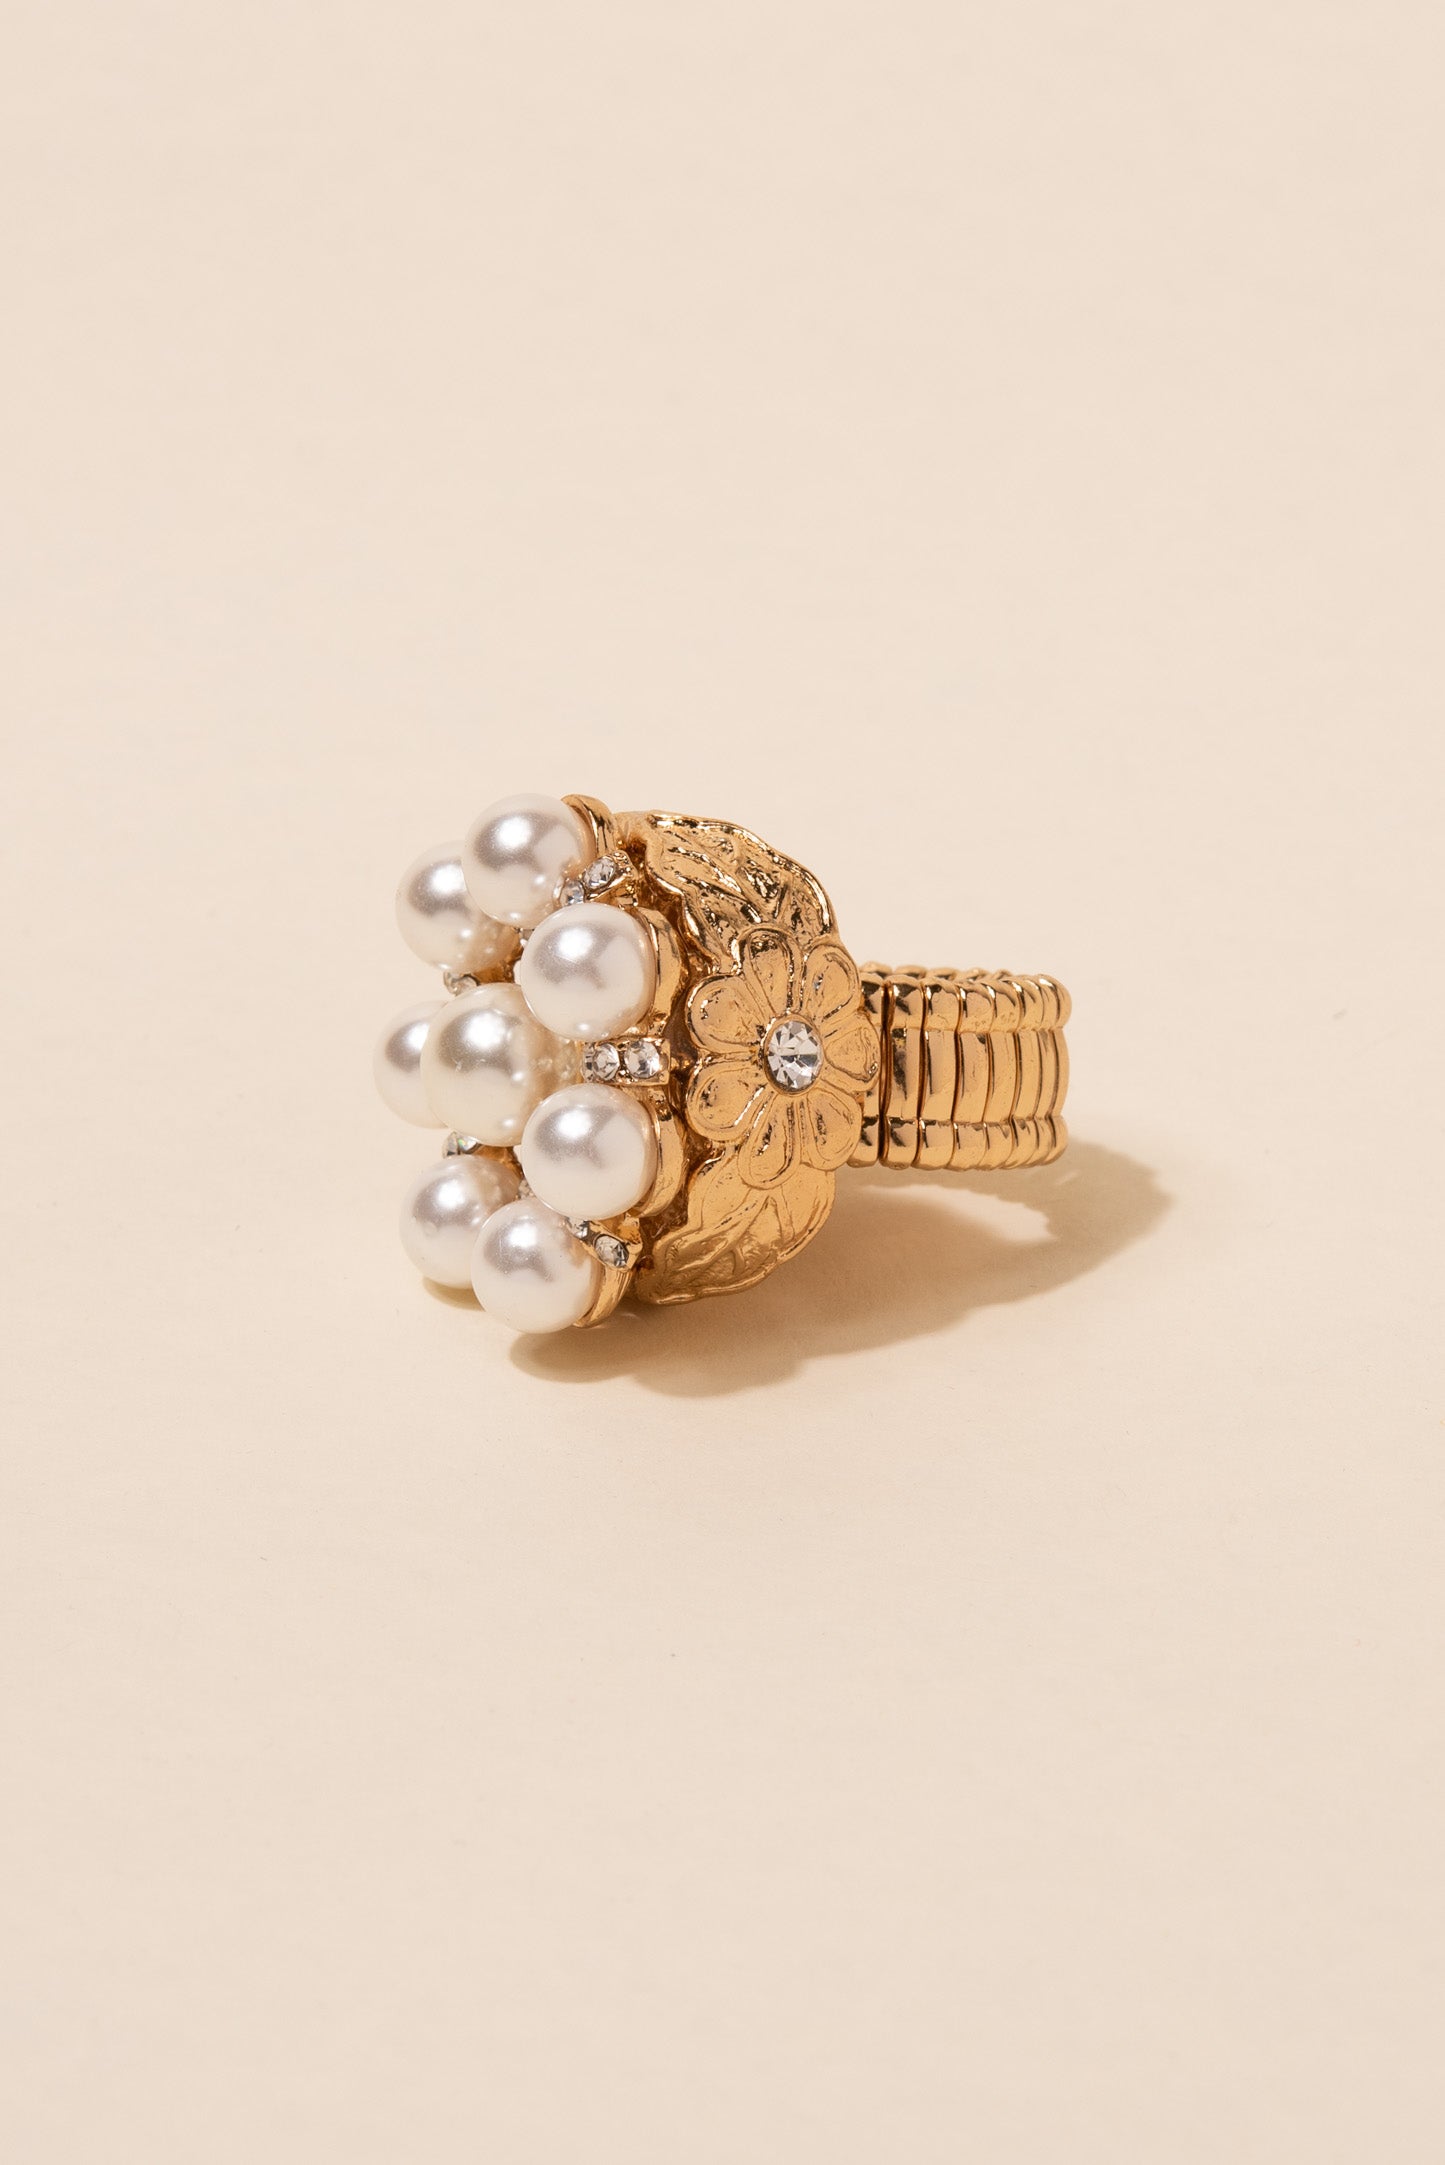 Crowned Jewel Pearl & Rhinestone Floral Stretch Ring - Gold